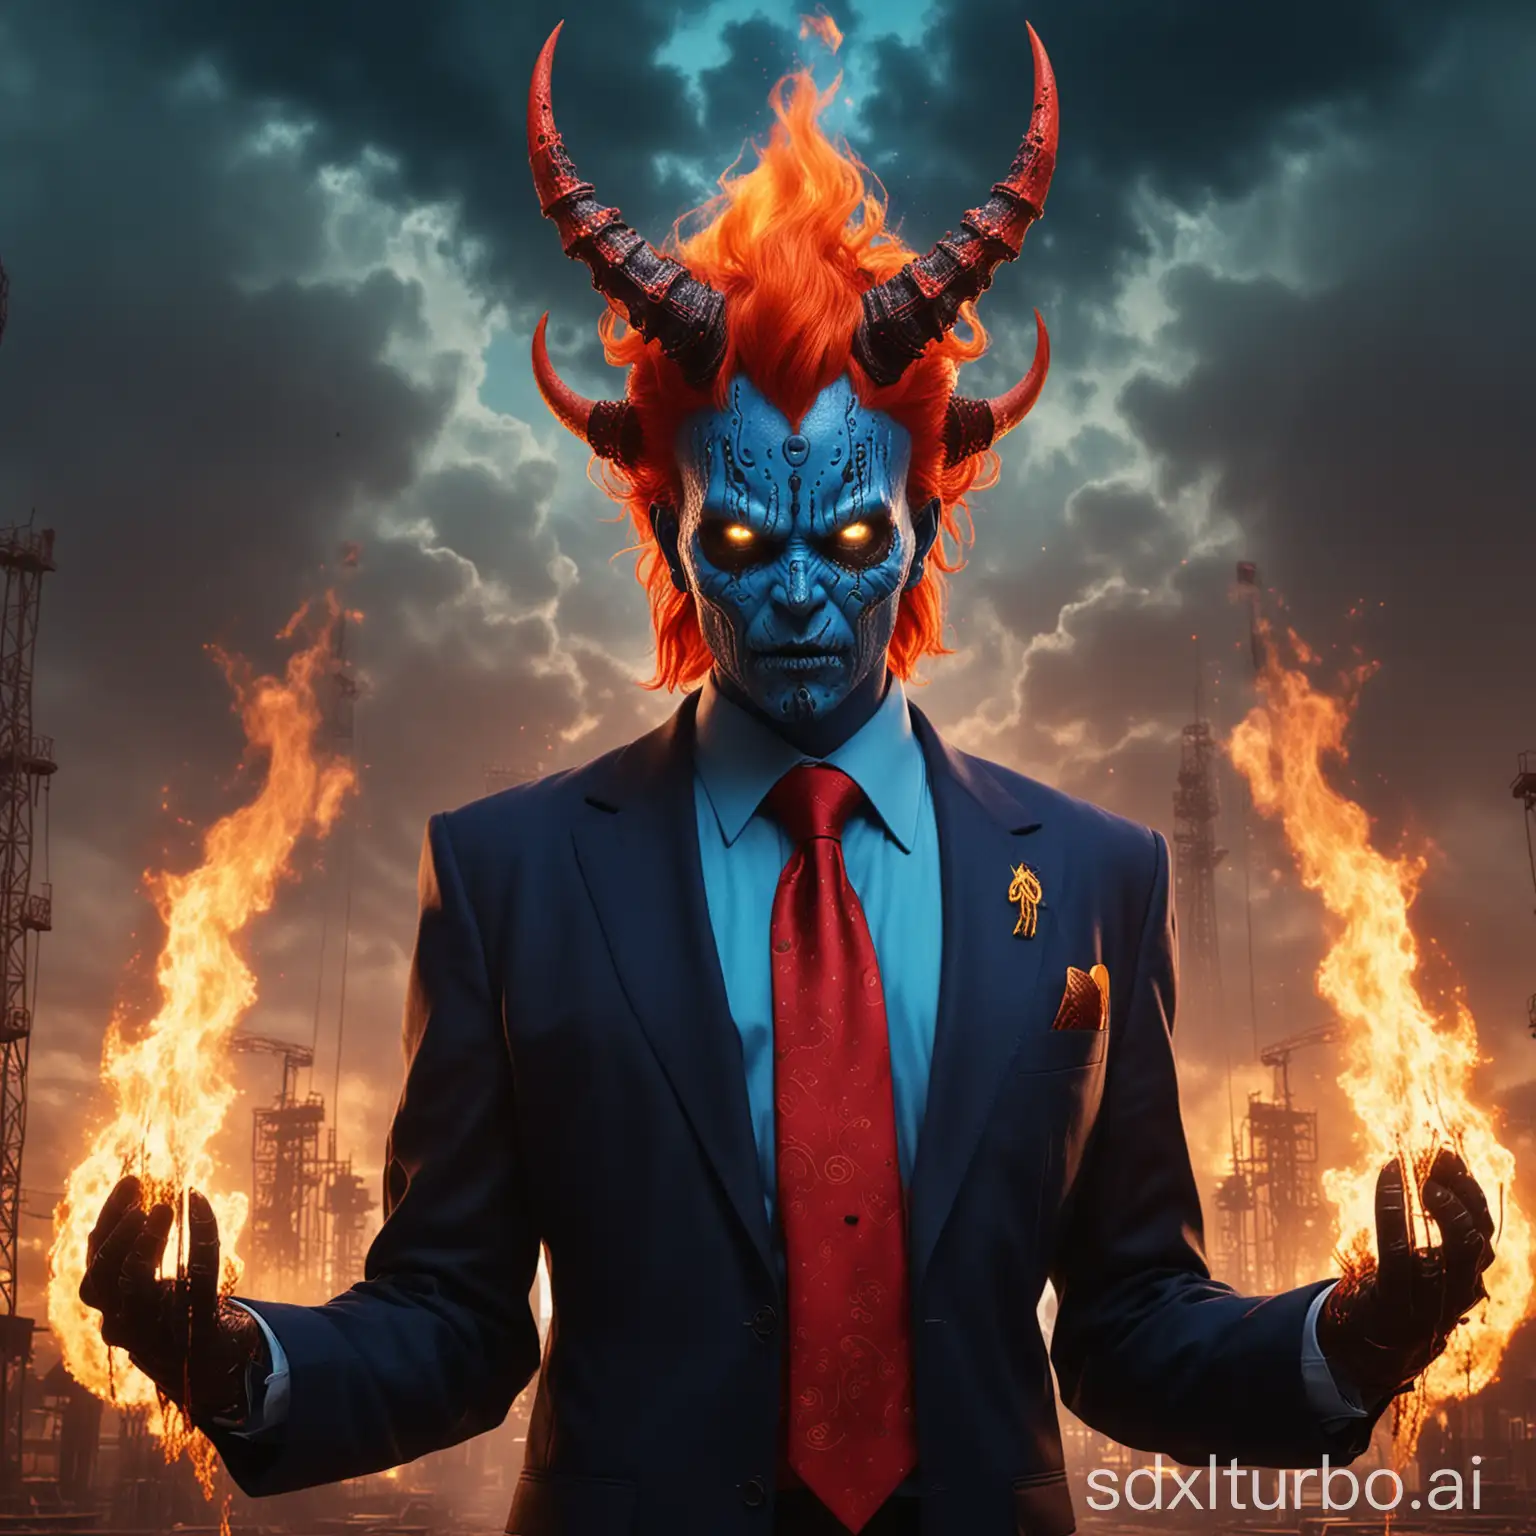 a furious skeletal fire-breathing malicious space demon Kali Purush stands, directly facing the camera, adorned in an intricate black garb and sporting fiery wings. Flames erupt from the hands while menacing horns adorn the head.   the red and yellow lighting.   an evil, greedy oil industry executive with orange hair, wearing a (blue business suit:1.5) and (red tie:1.5) and looks like Donald Trump  (drilling the earth for oil:1.25) causing climate change and bringing fiery devastation to the earth surface.   Let this 3-D masterpiece serve as a catalyst for creating fear of climate change to bring change to governmental policy for climate change.   lightning surrounds the demon Kali Purush intricate details oil drilling towers are seen on the surface planet surface fires well drawn faces